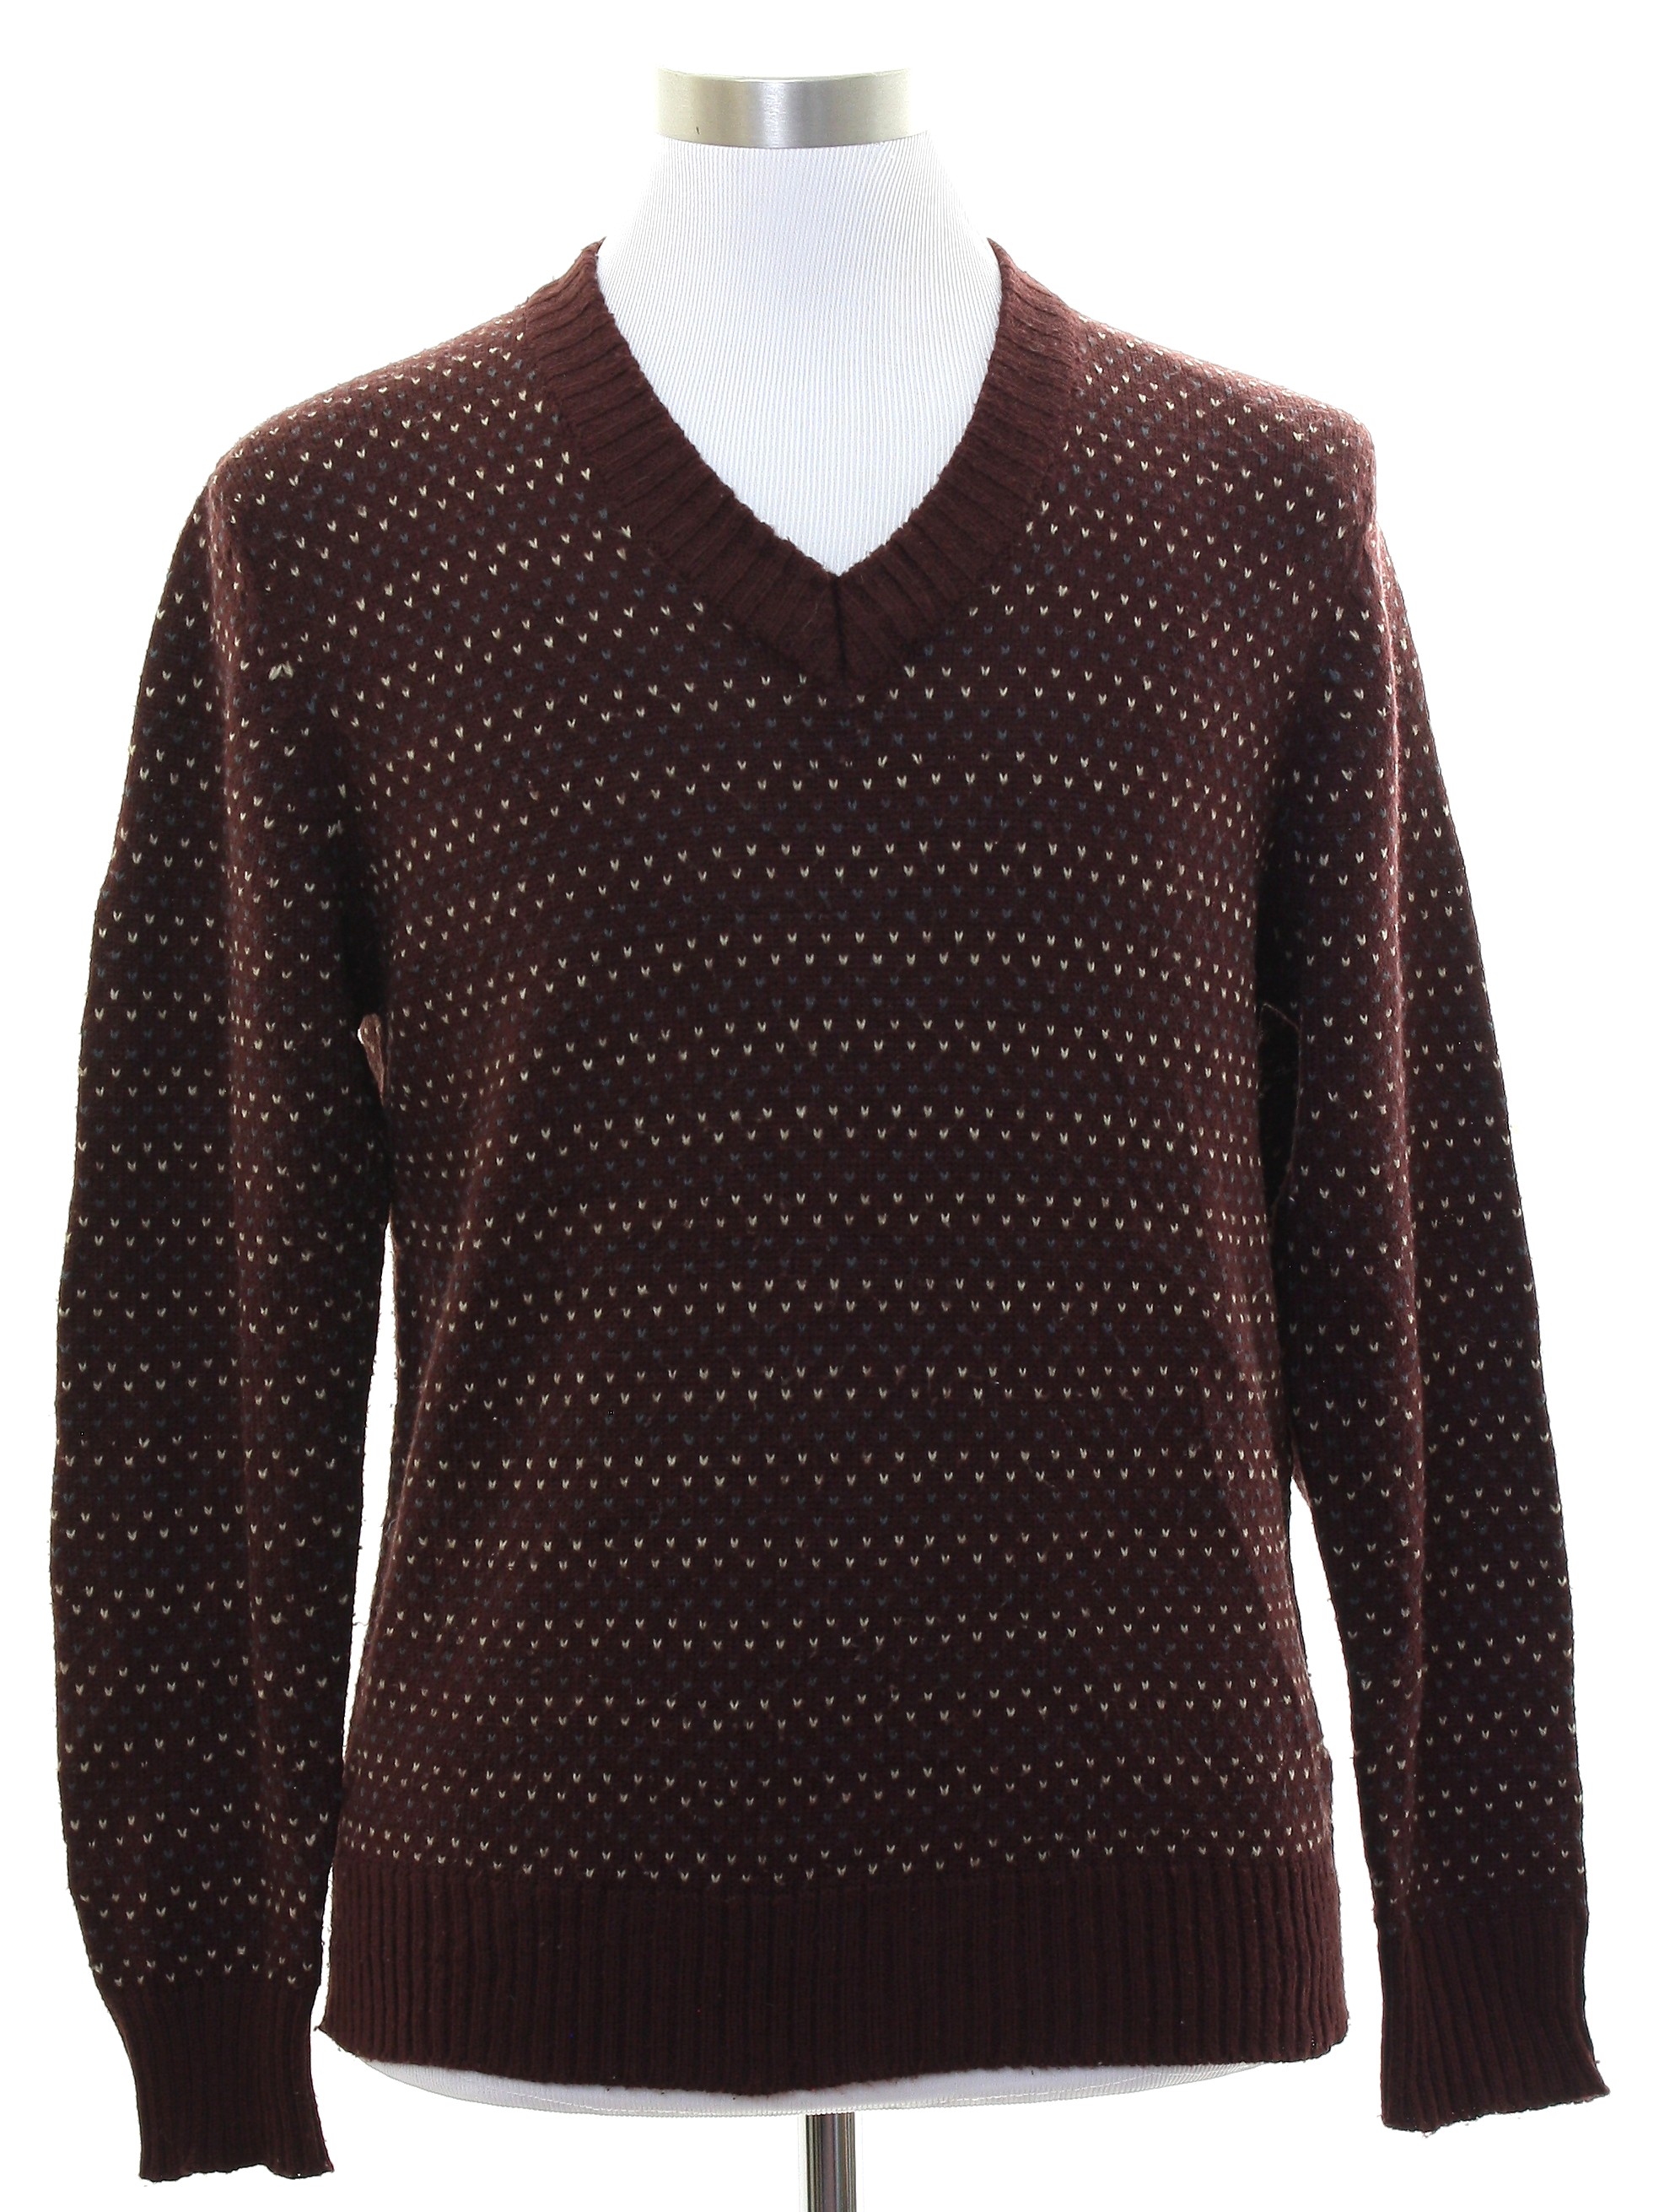 1980's Retro Sweater: Early 80s -YoungBloods- Mens maroon background ...